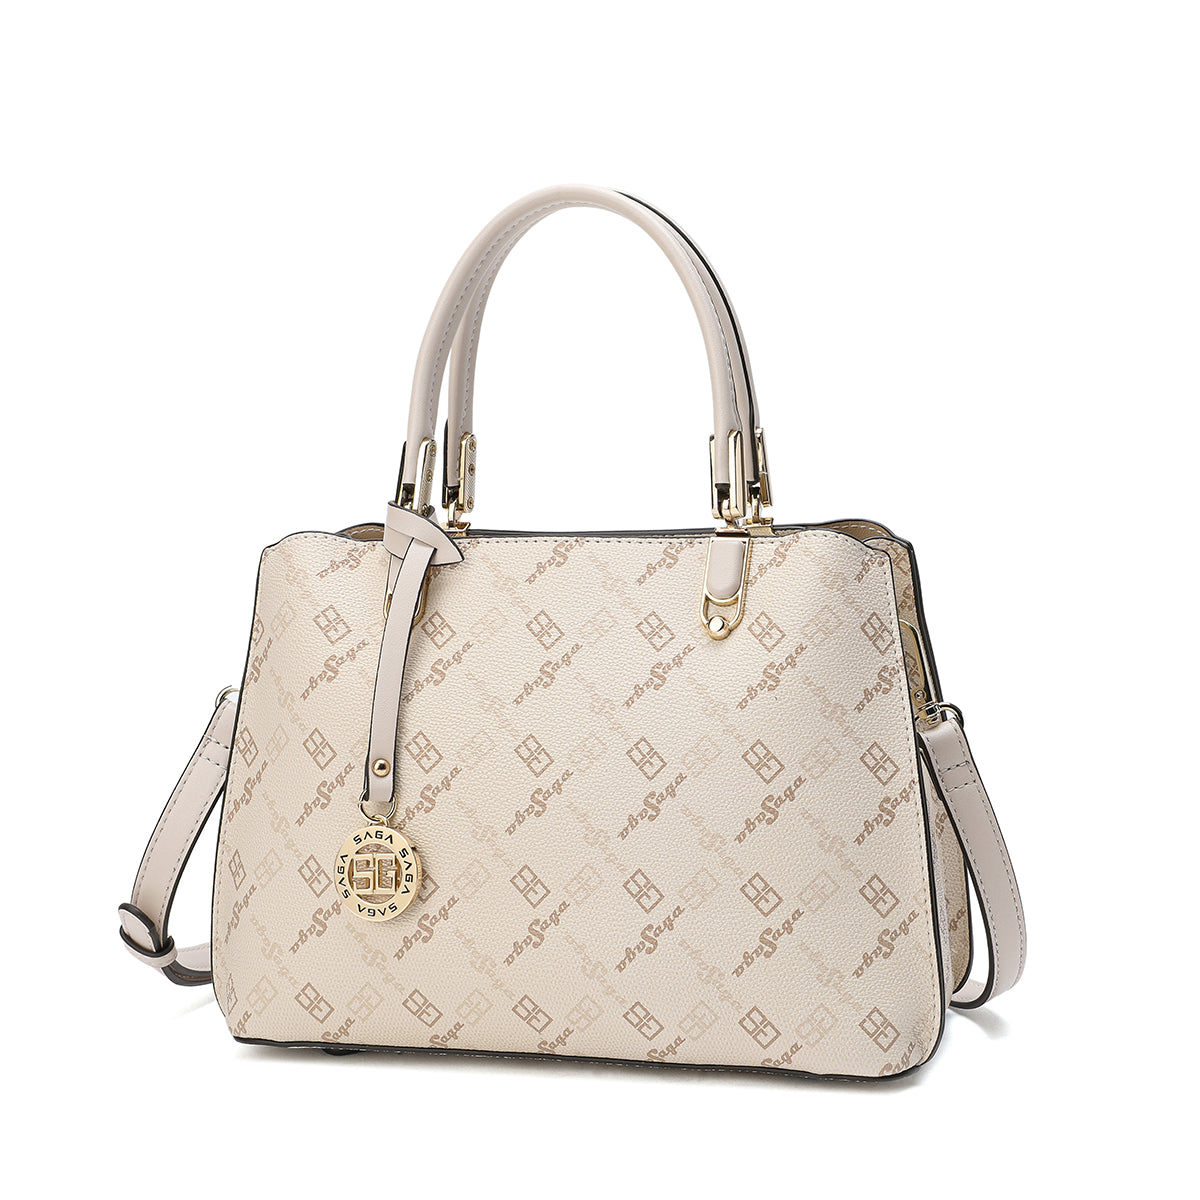 An elegant, spacious bag, 31 cm wide, with a long shoulder strap, brown or cream color